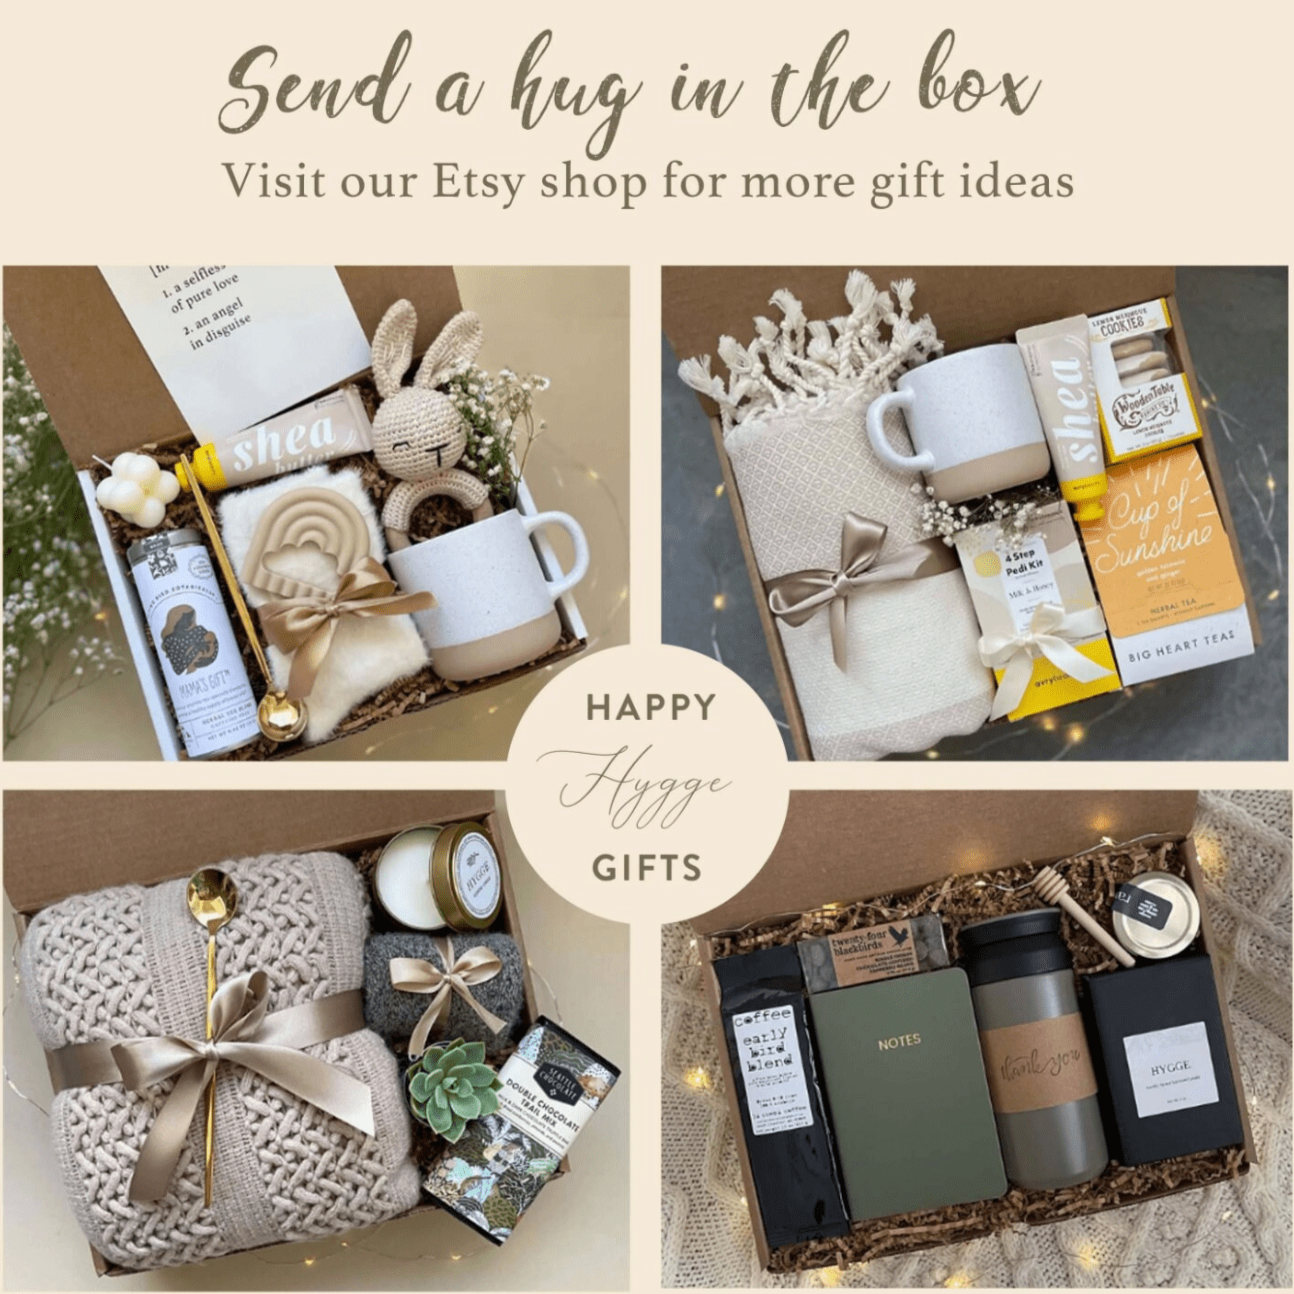 Five-Star Hygge Gift Box  Gender Neutral Gift for Men & Women – Happy Hygge  Gifts